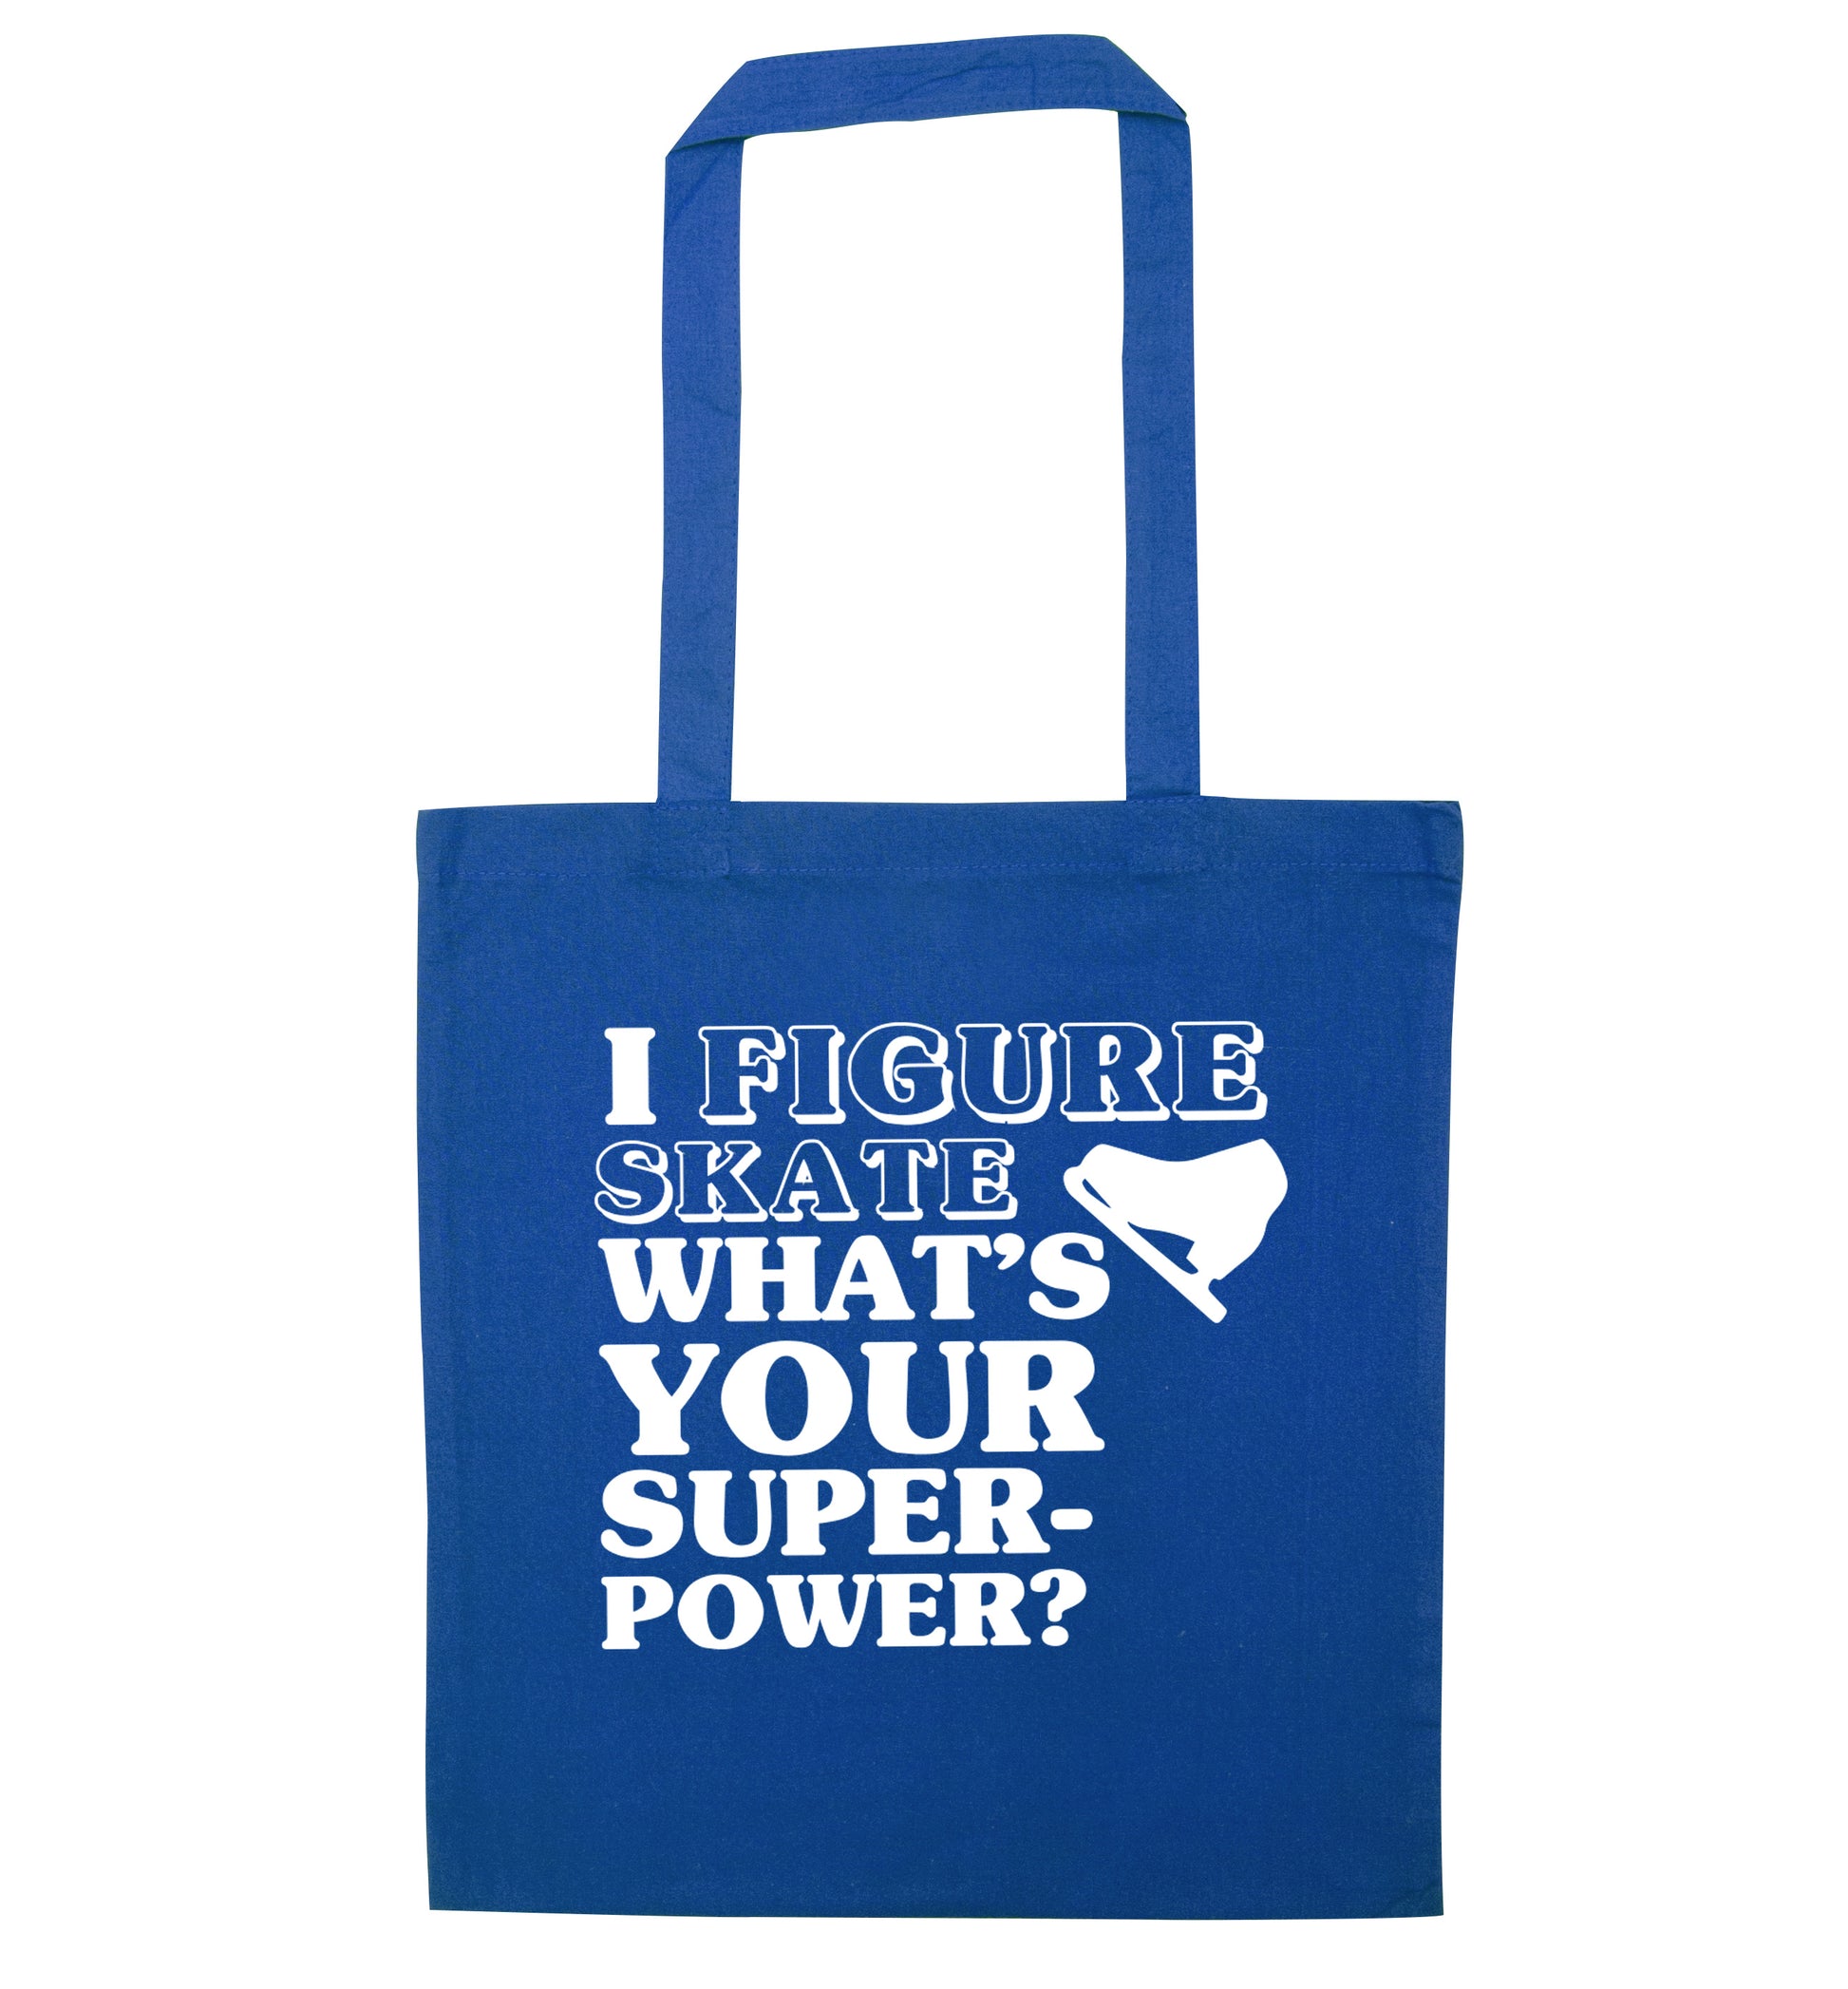 I figure skate what's your superpower? blue tote bag